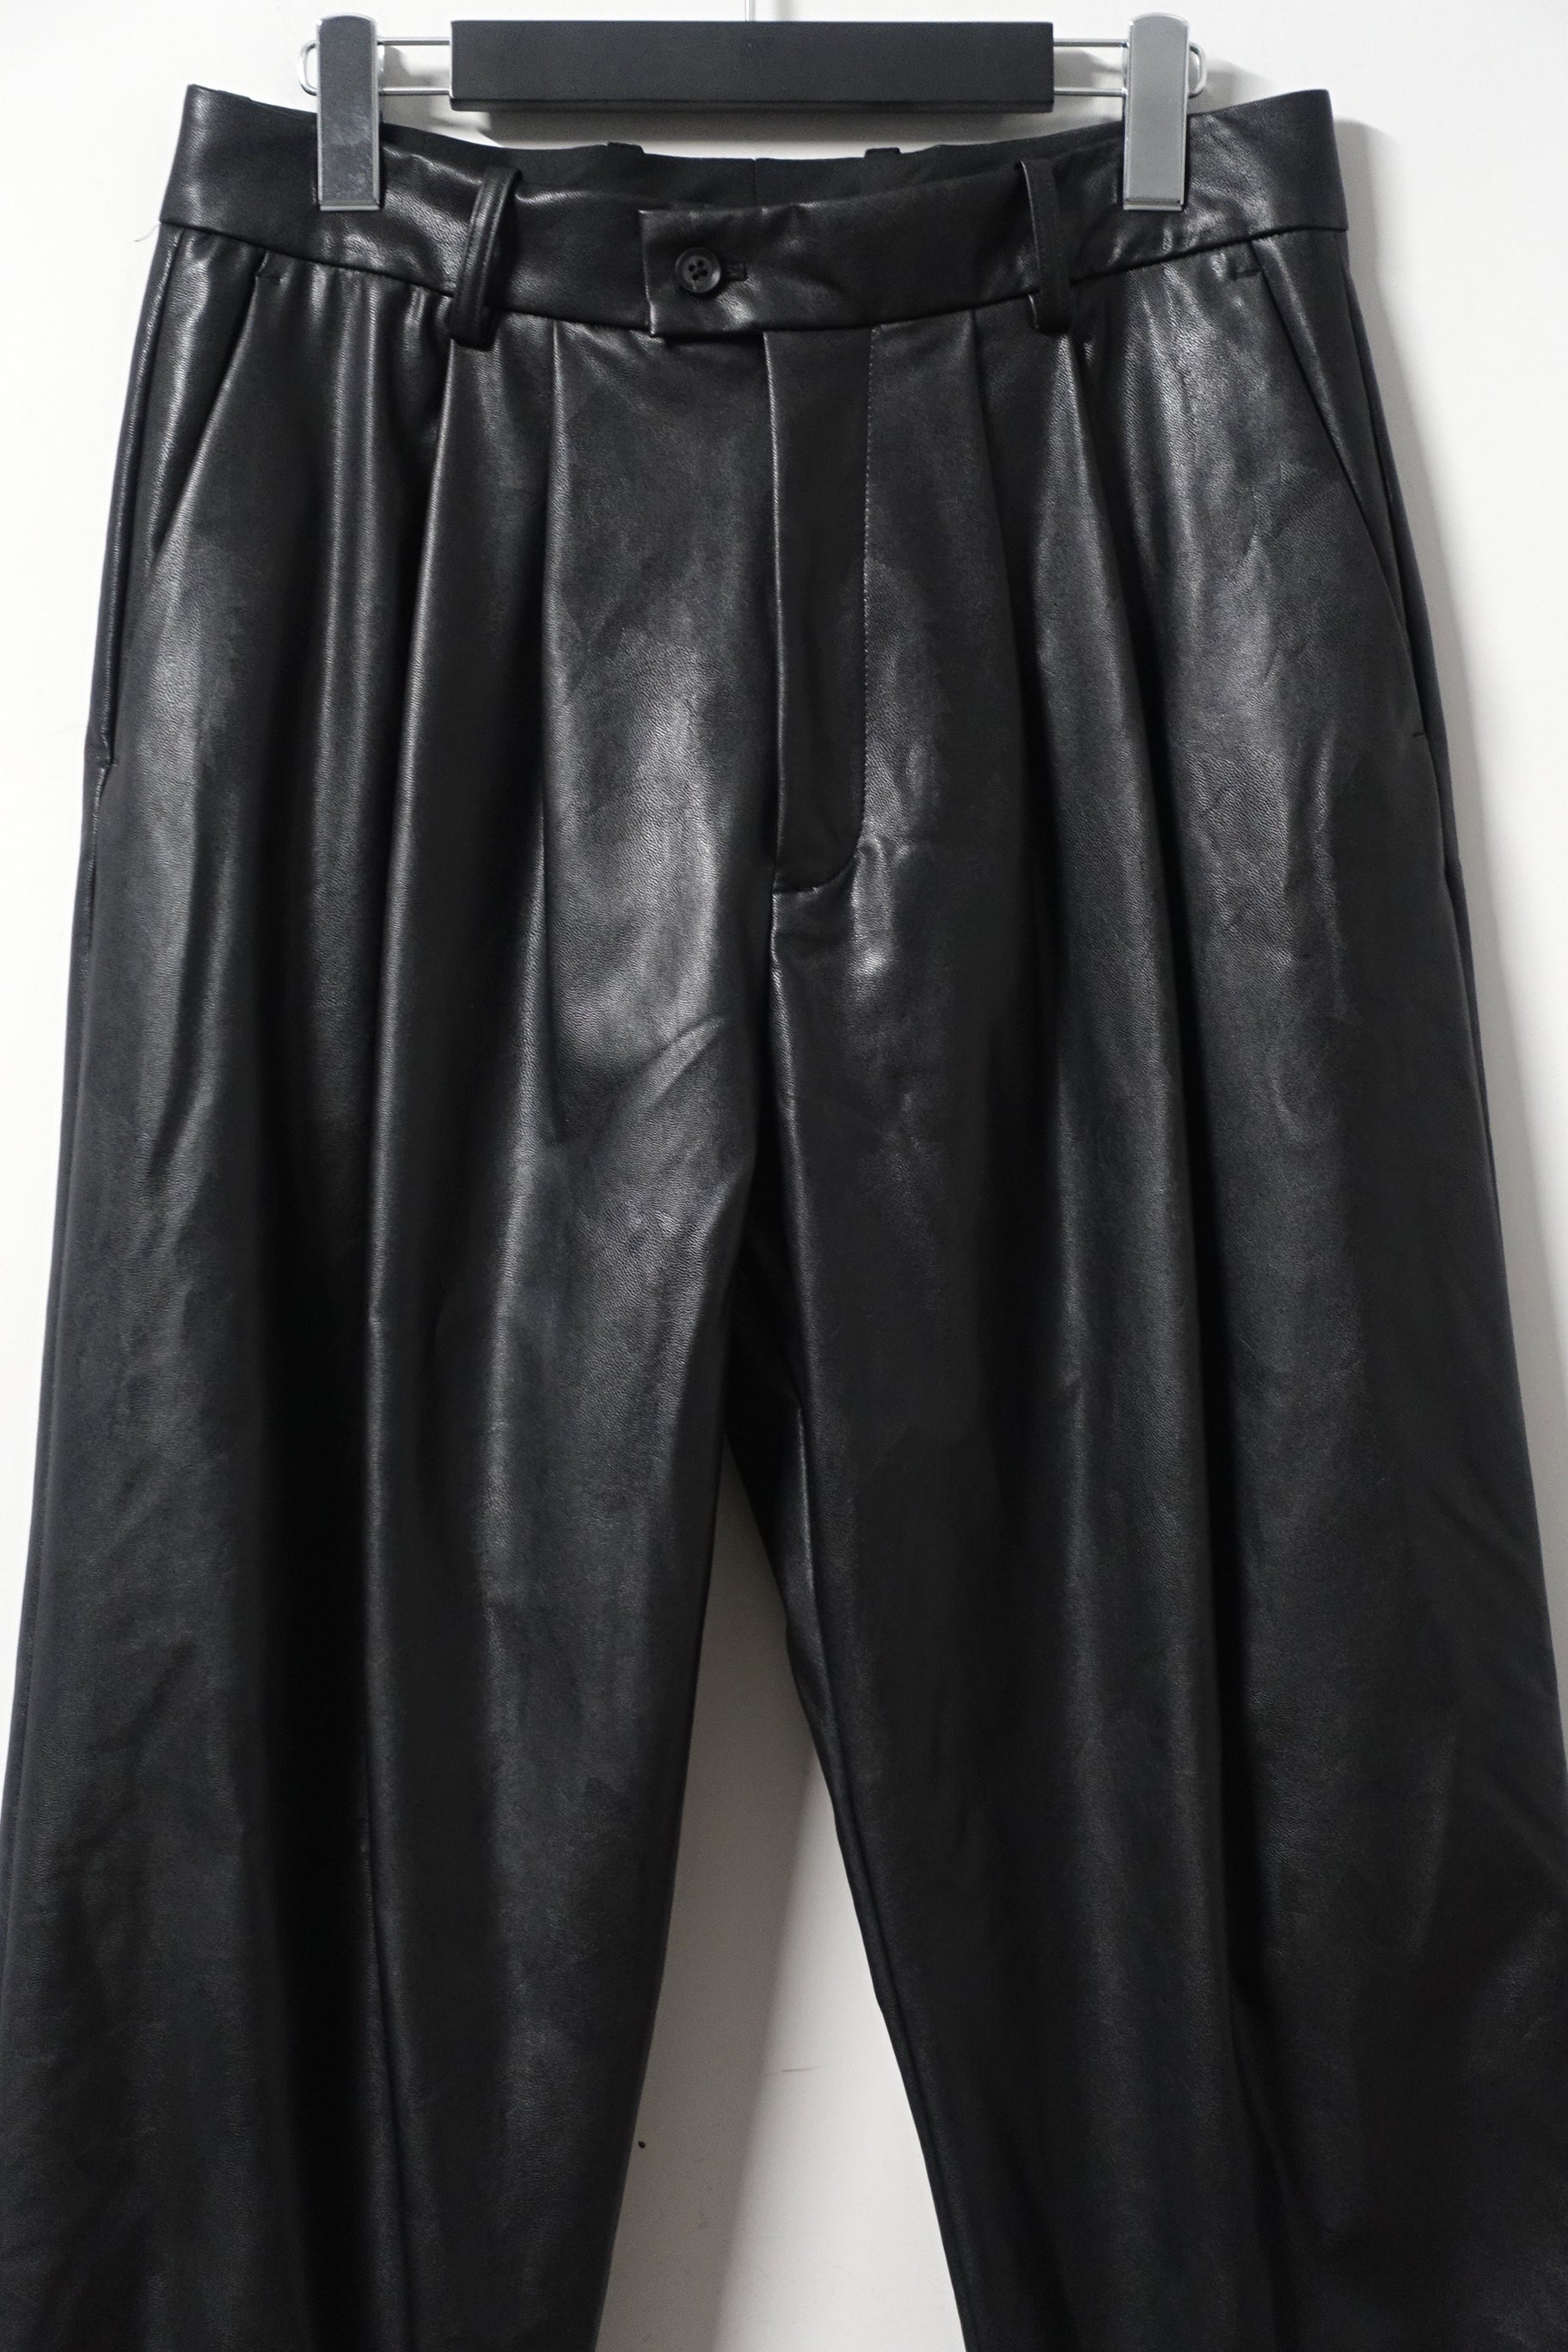 stein(シュタイン)/FAKE LEATHER TROUSERS/Black 通販 取り扱い 